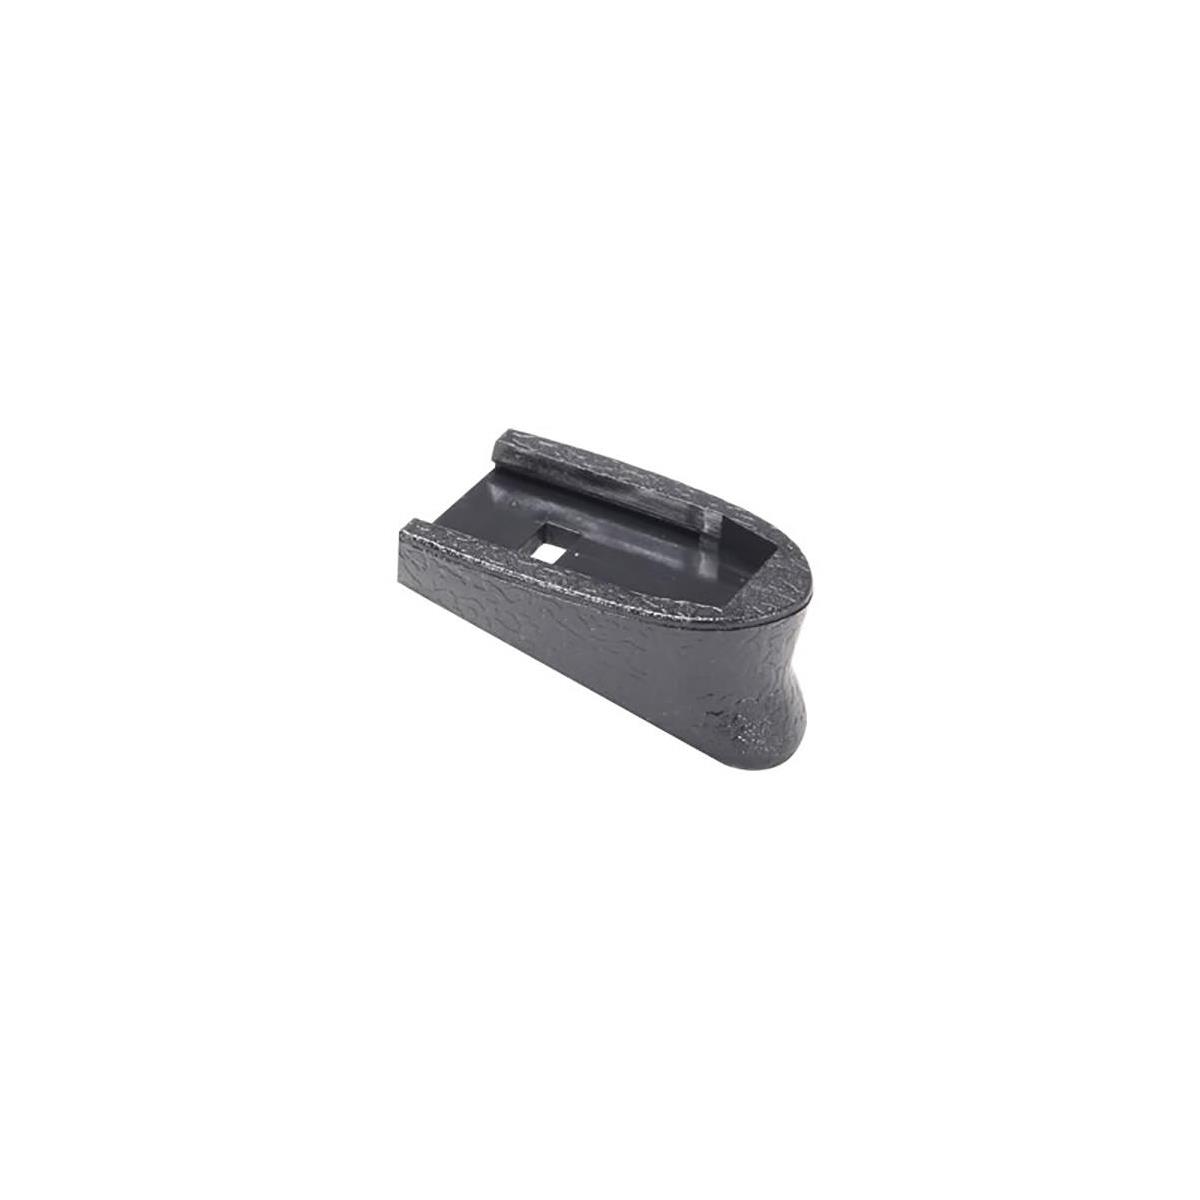 Lyman Grip Extender for Smith & Wesson Shield Pistol - buy at the price ...